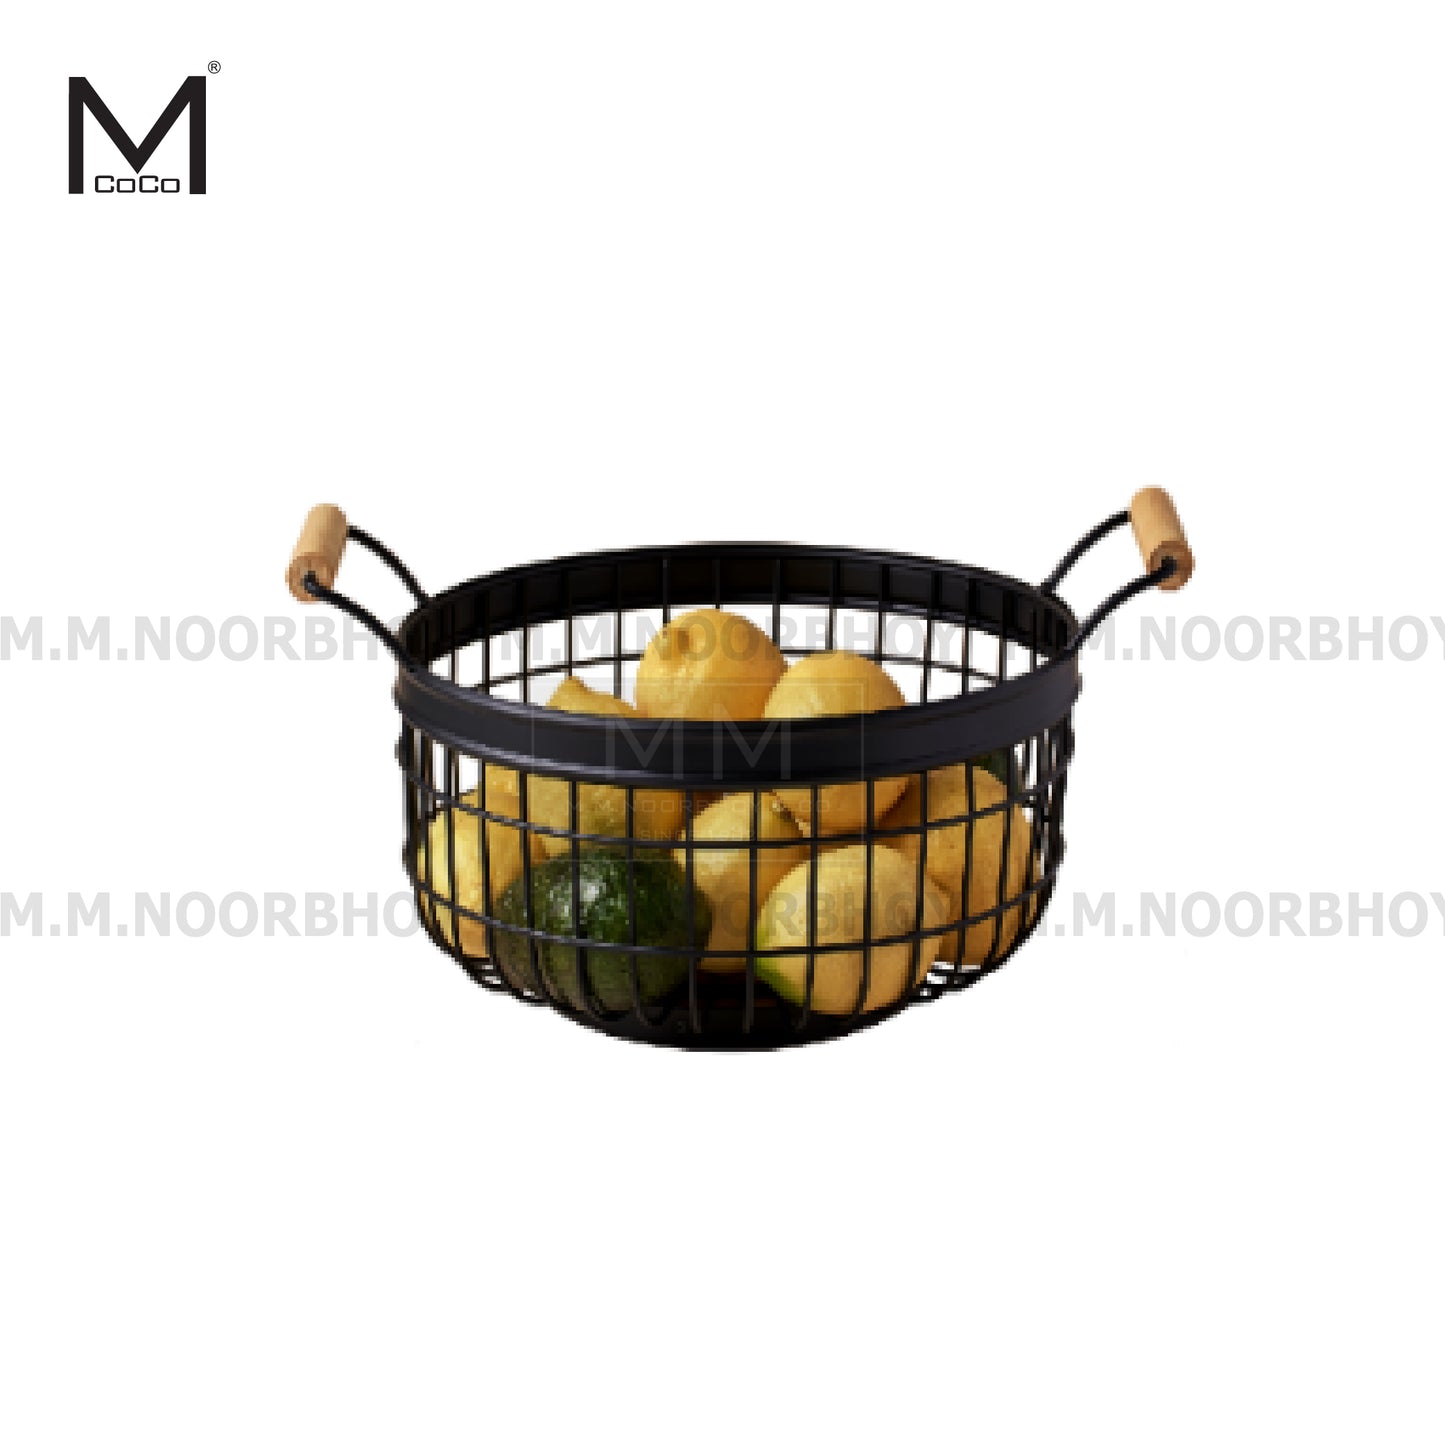 Mcoco Multipurpose Round Storage Basket with Wooden Bottom, Black Color Each - YI-16614